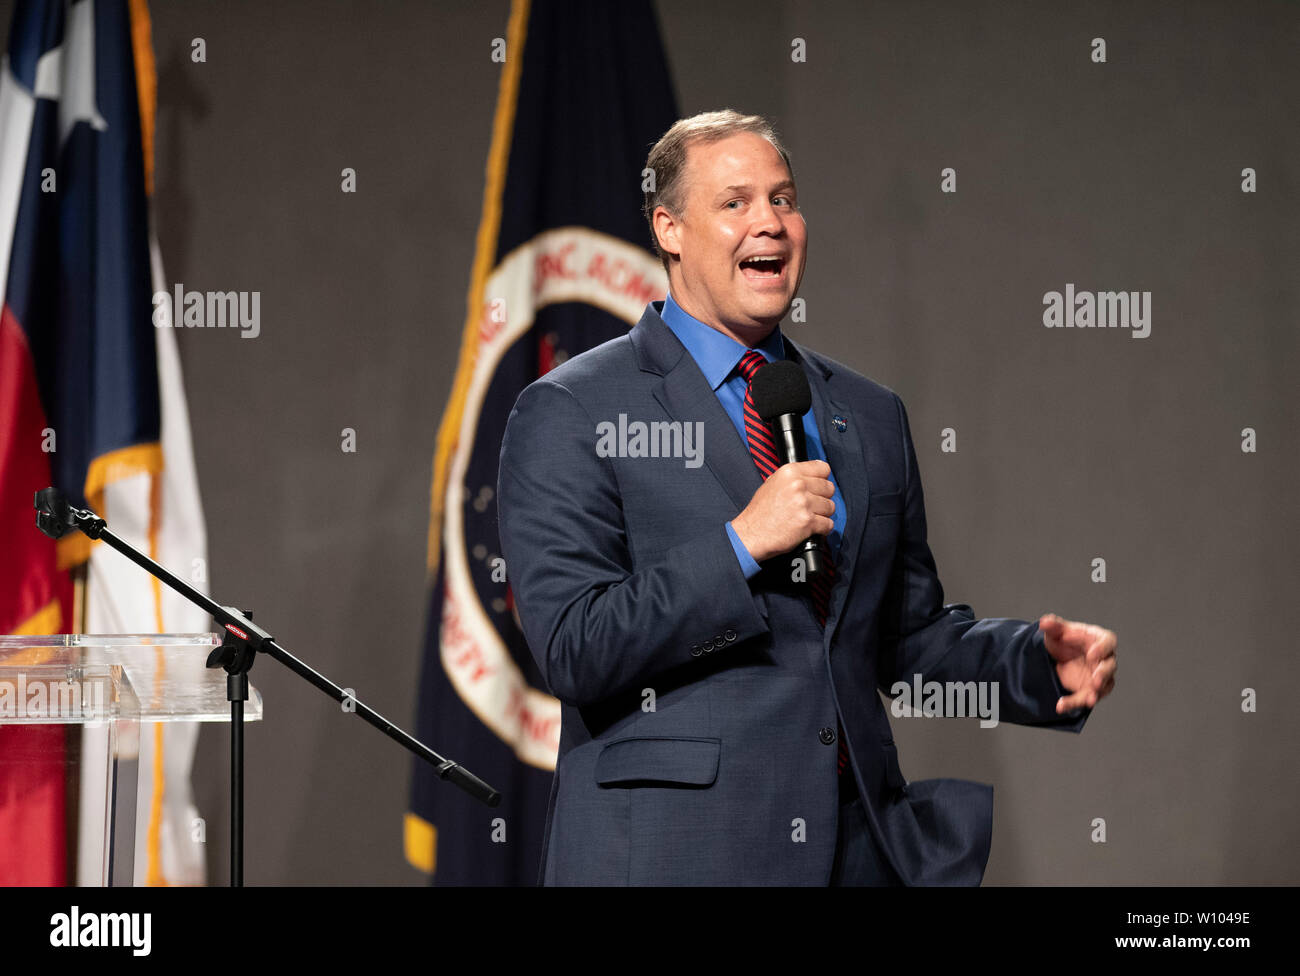 National Aeronautics and Space Administration Administrator Jim Bridenstine speaks at the Johnson Space Center near Houston, Texas during an event commemorating the 50th anniversary of the Apollo 11 spaceflight that was the first to land men on the moon in 1969. Stock Photo